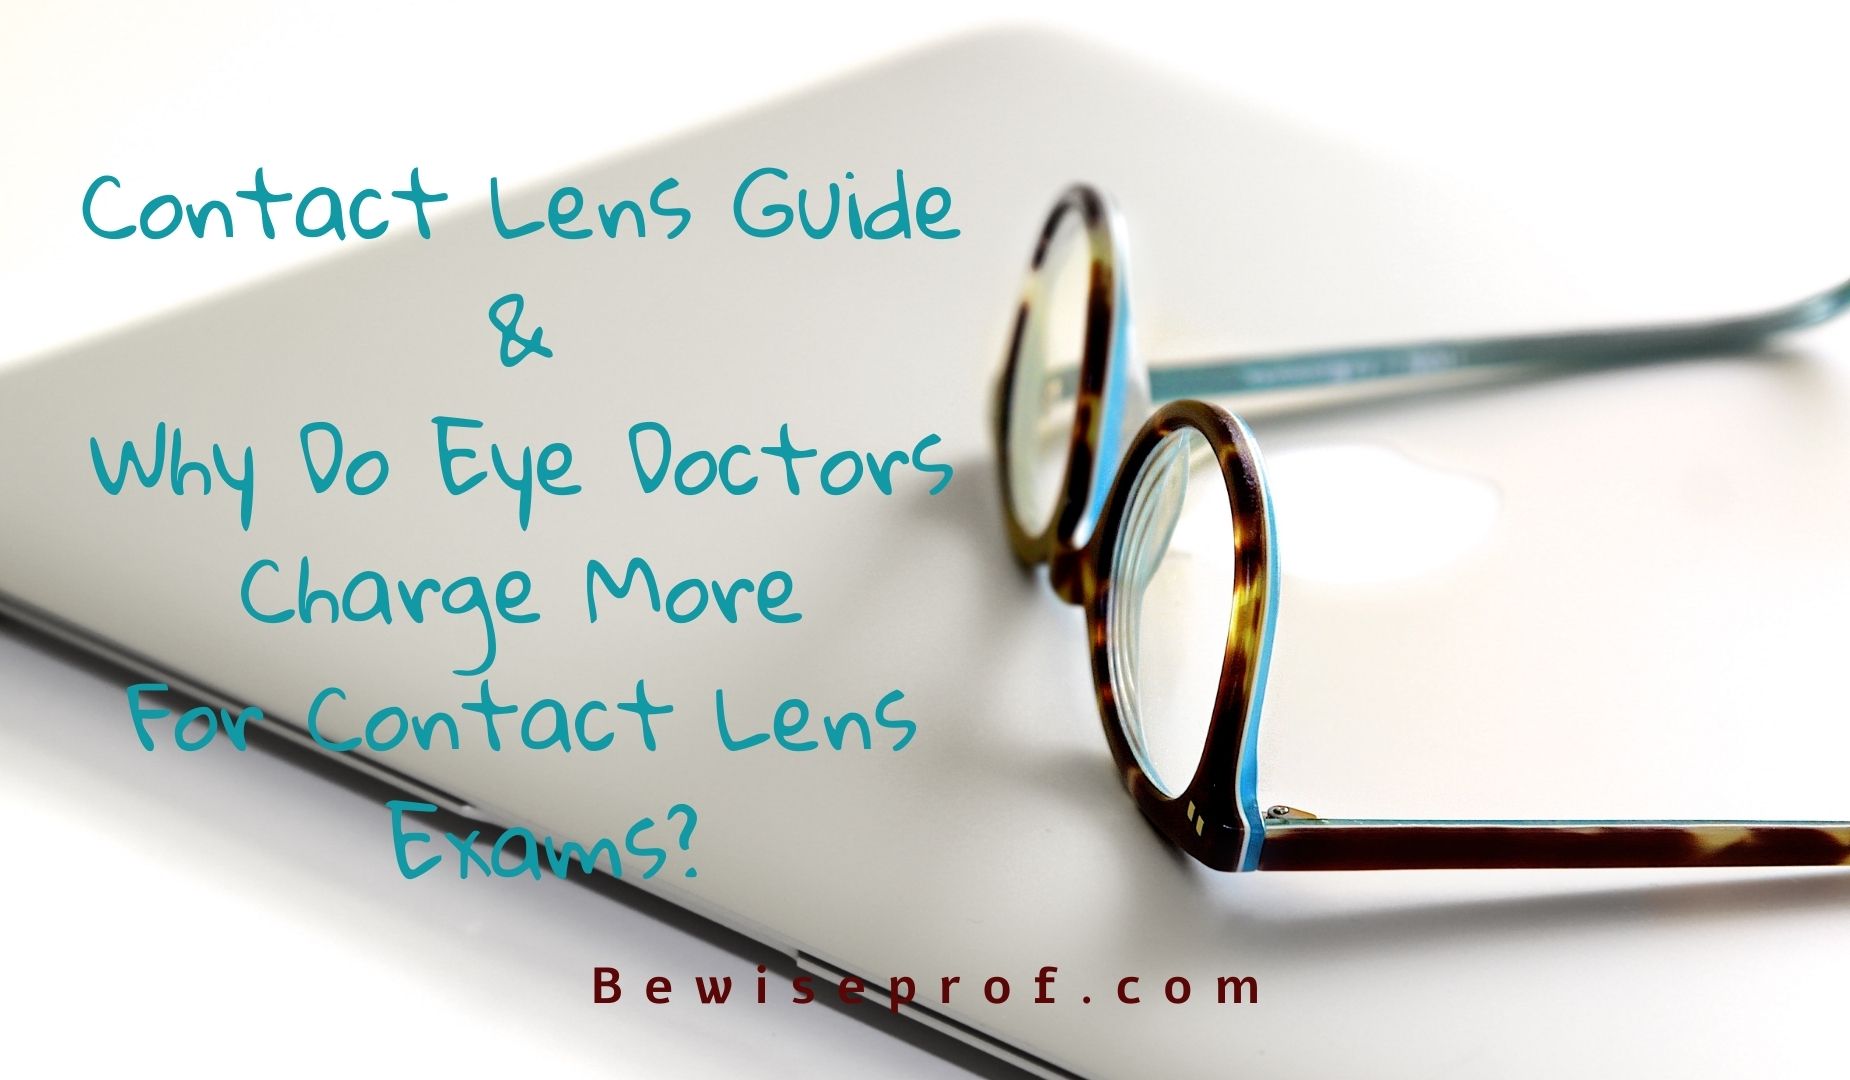 Contact Lens Guide and Why Do Eye Doctors Charge More for Contact Lens Exams?